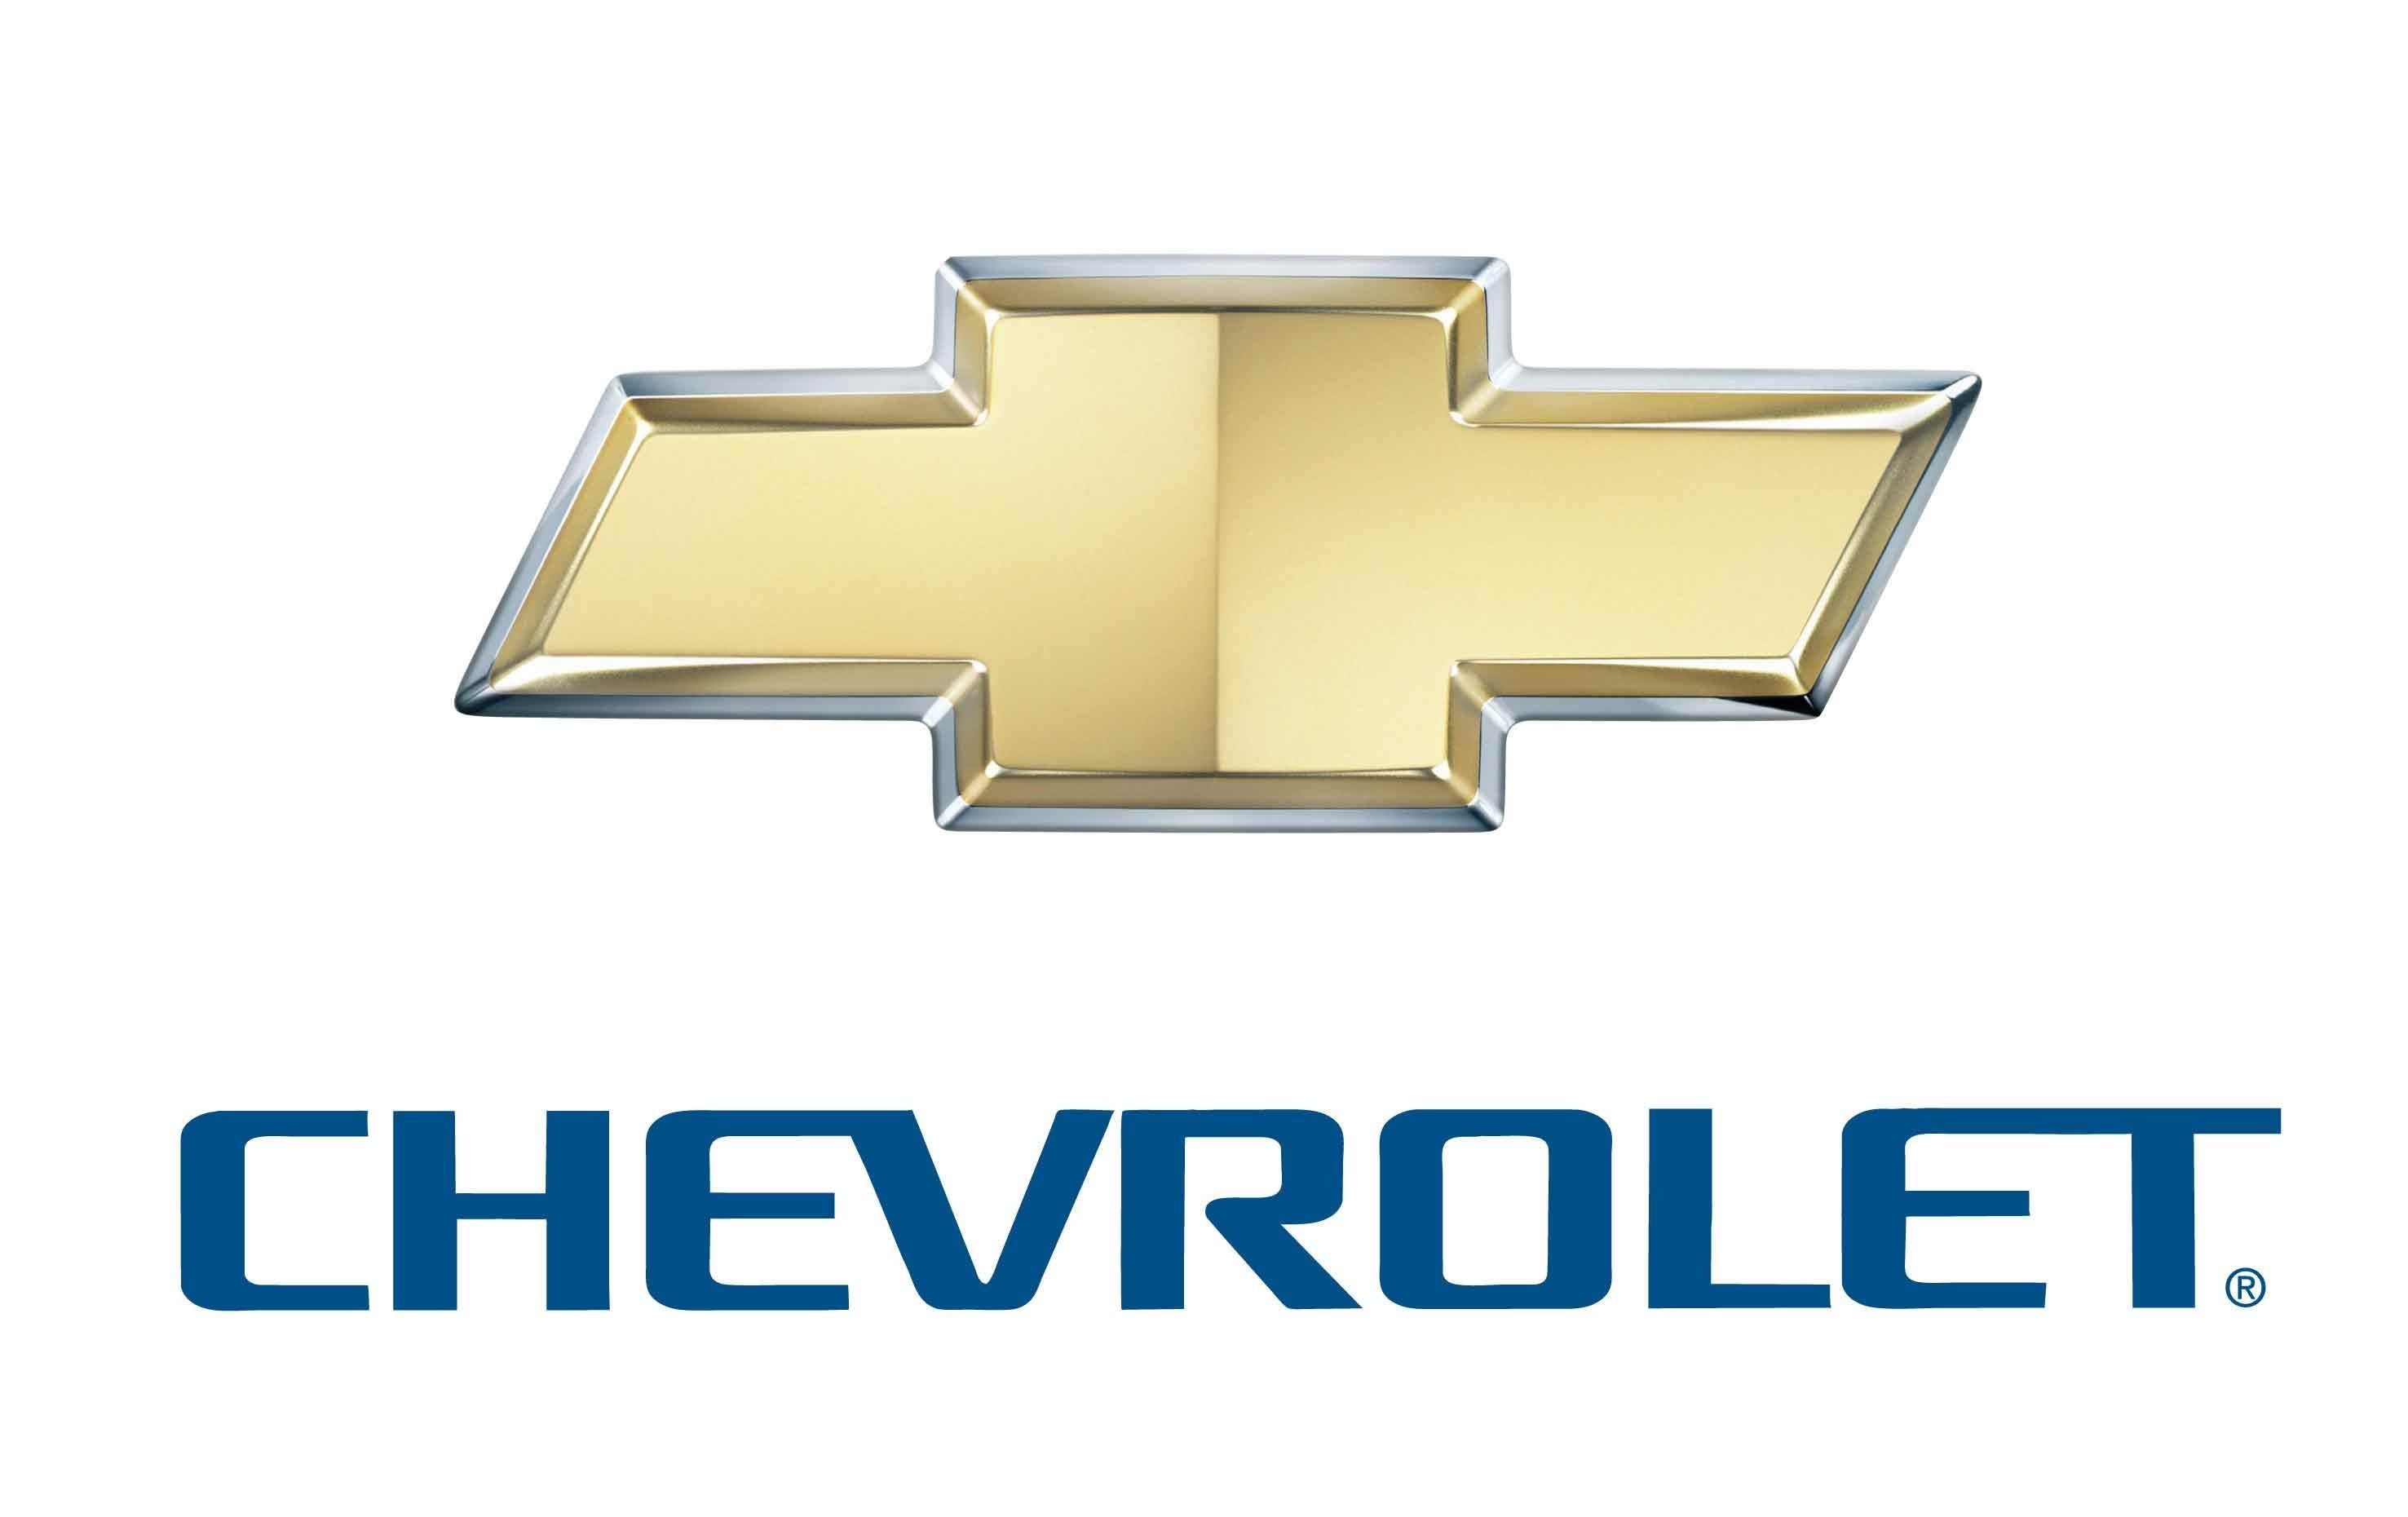 2953x1860 Related Pictures from Chevrolet Logo iPhone Wallpaper